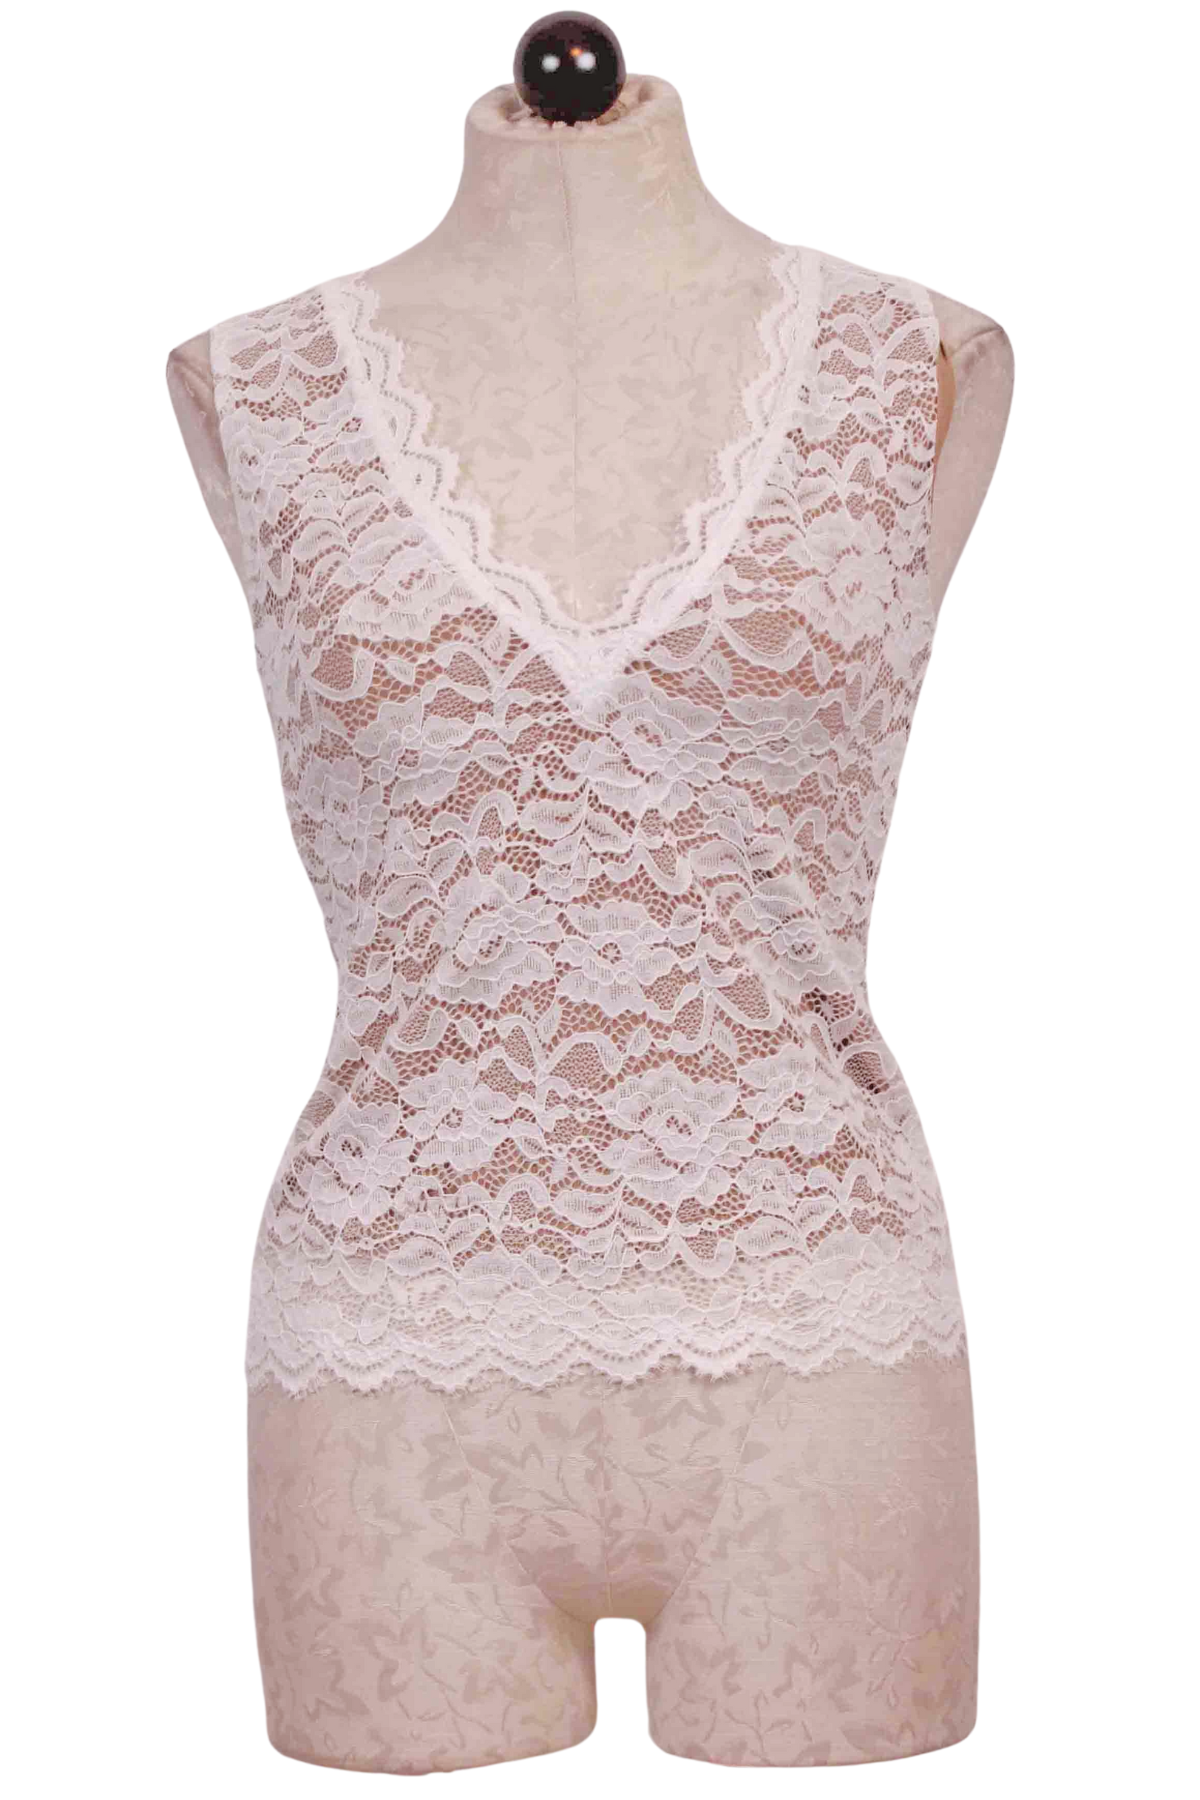 White/Beige Leila Stretch Lace Tank Top by Generation Love